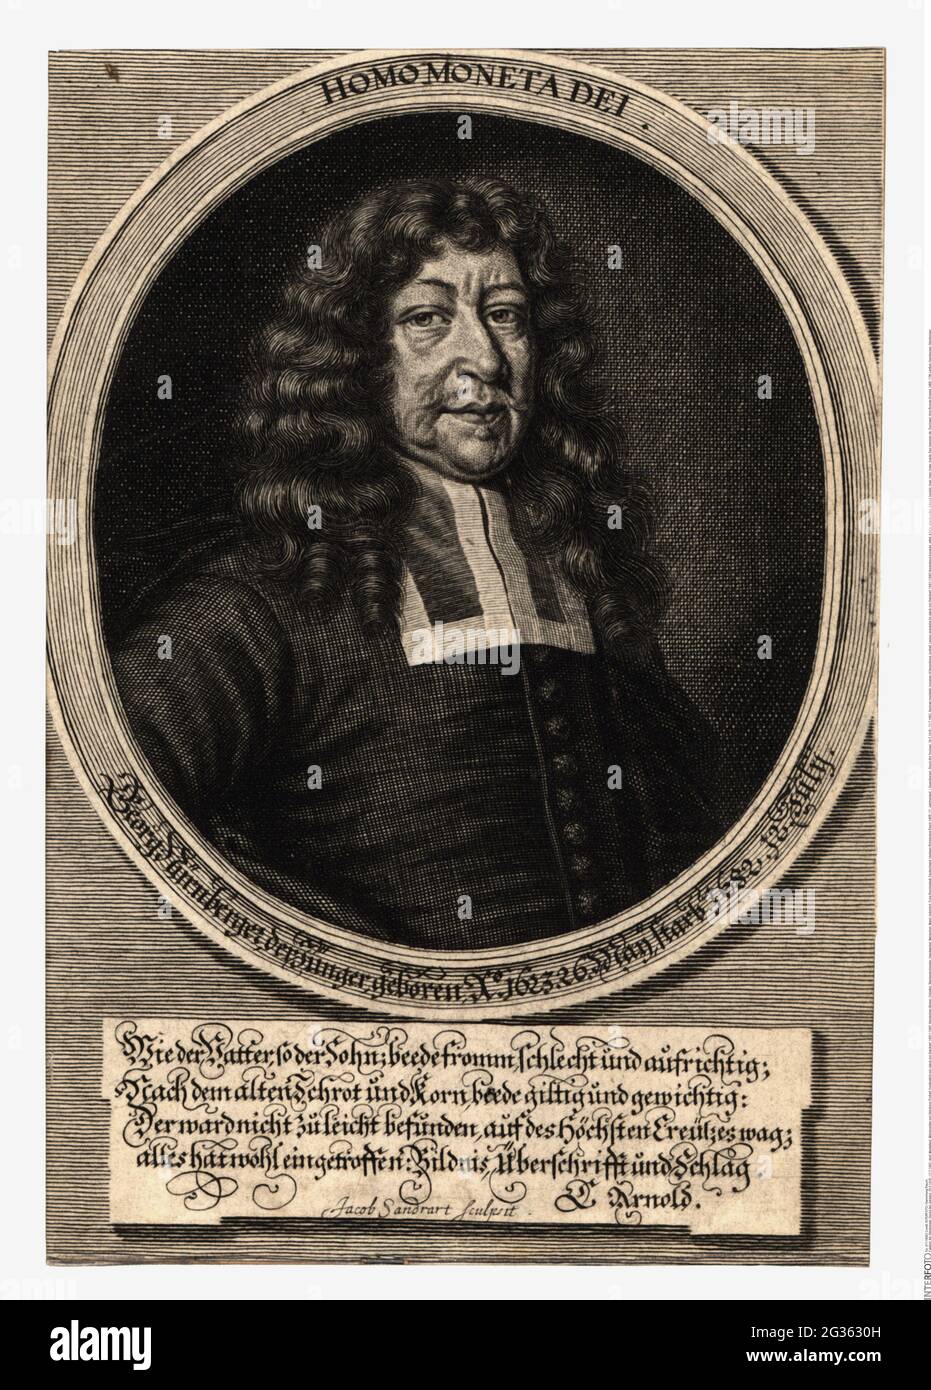 Nuernberger, Georg the Younger, 26.5.1626 - 12.7.1682, German medalist, moneyer of Nuremberg, portrait, ARTIST'S COPYRIGHT HAS NOT TO BE CLEARED Stock Photo